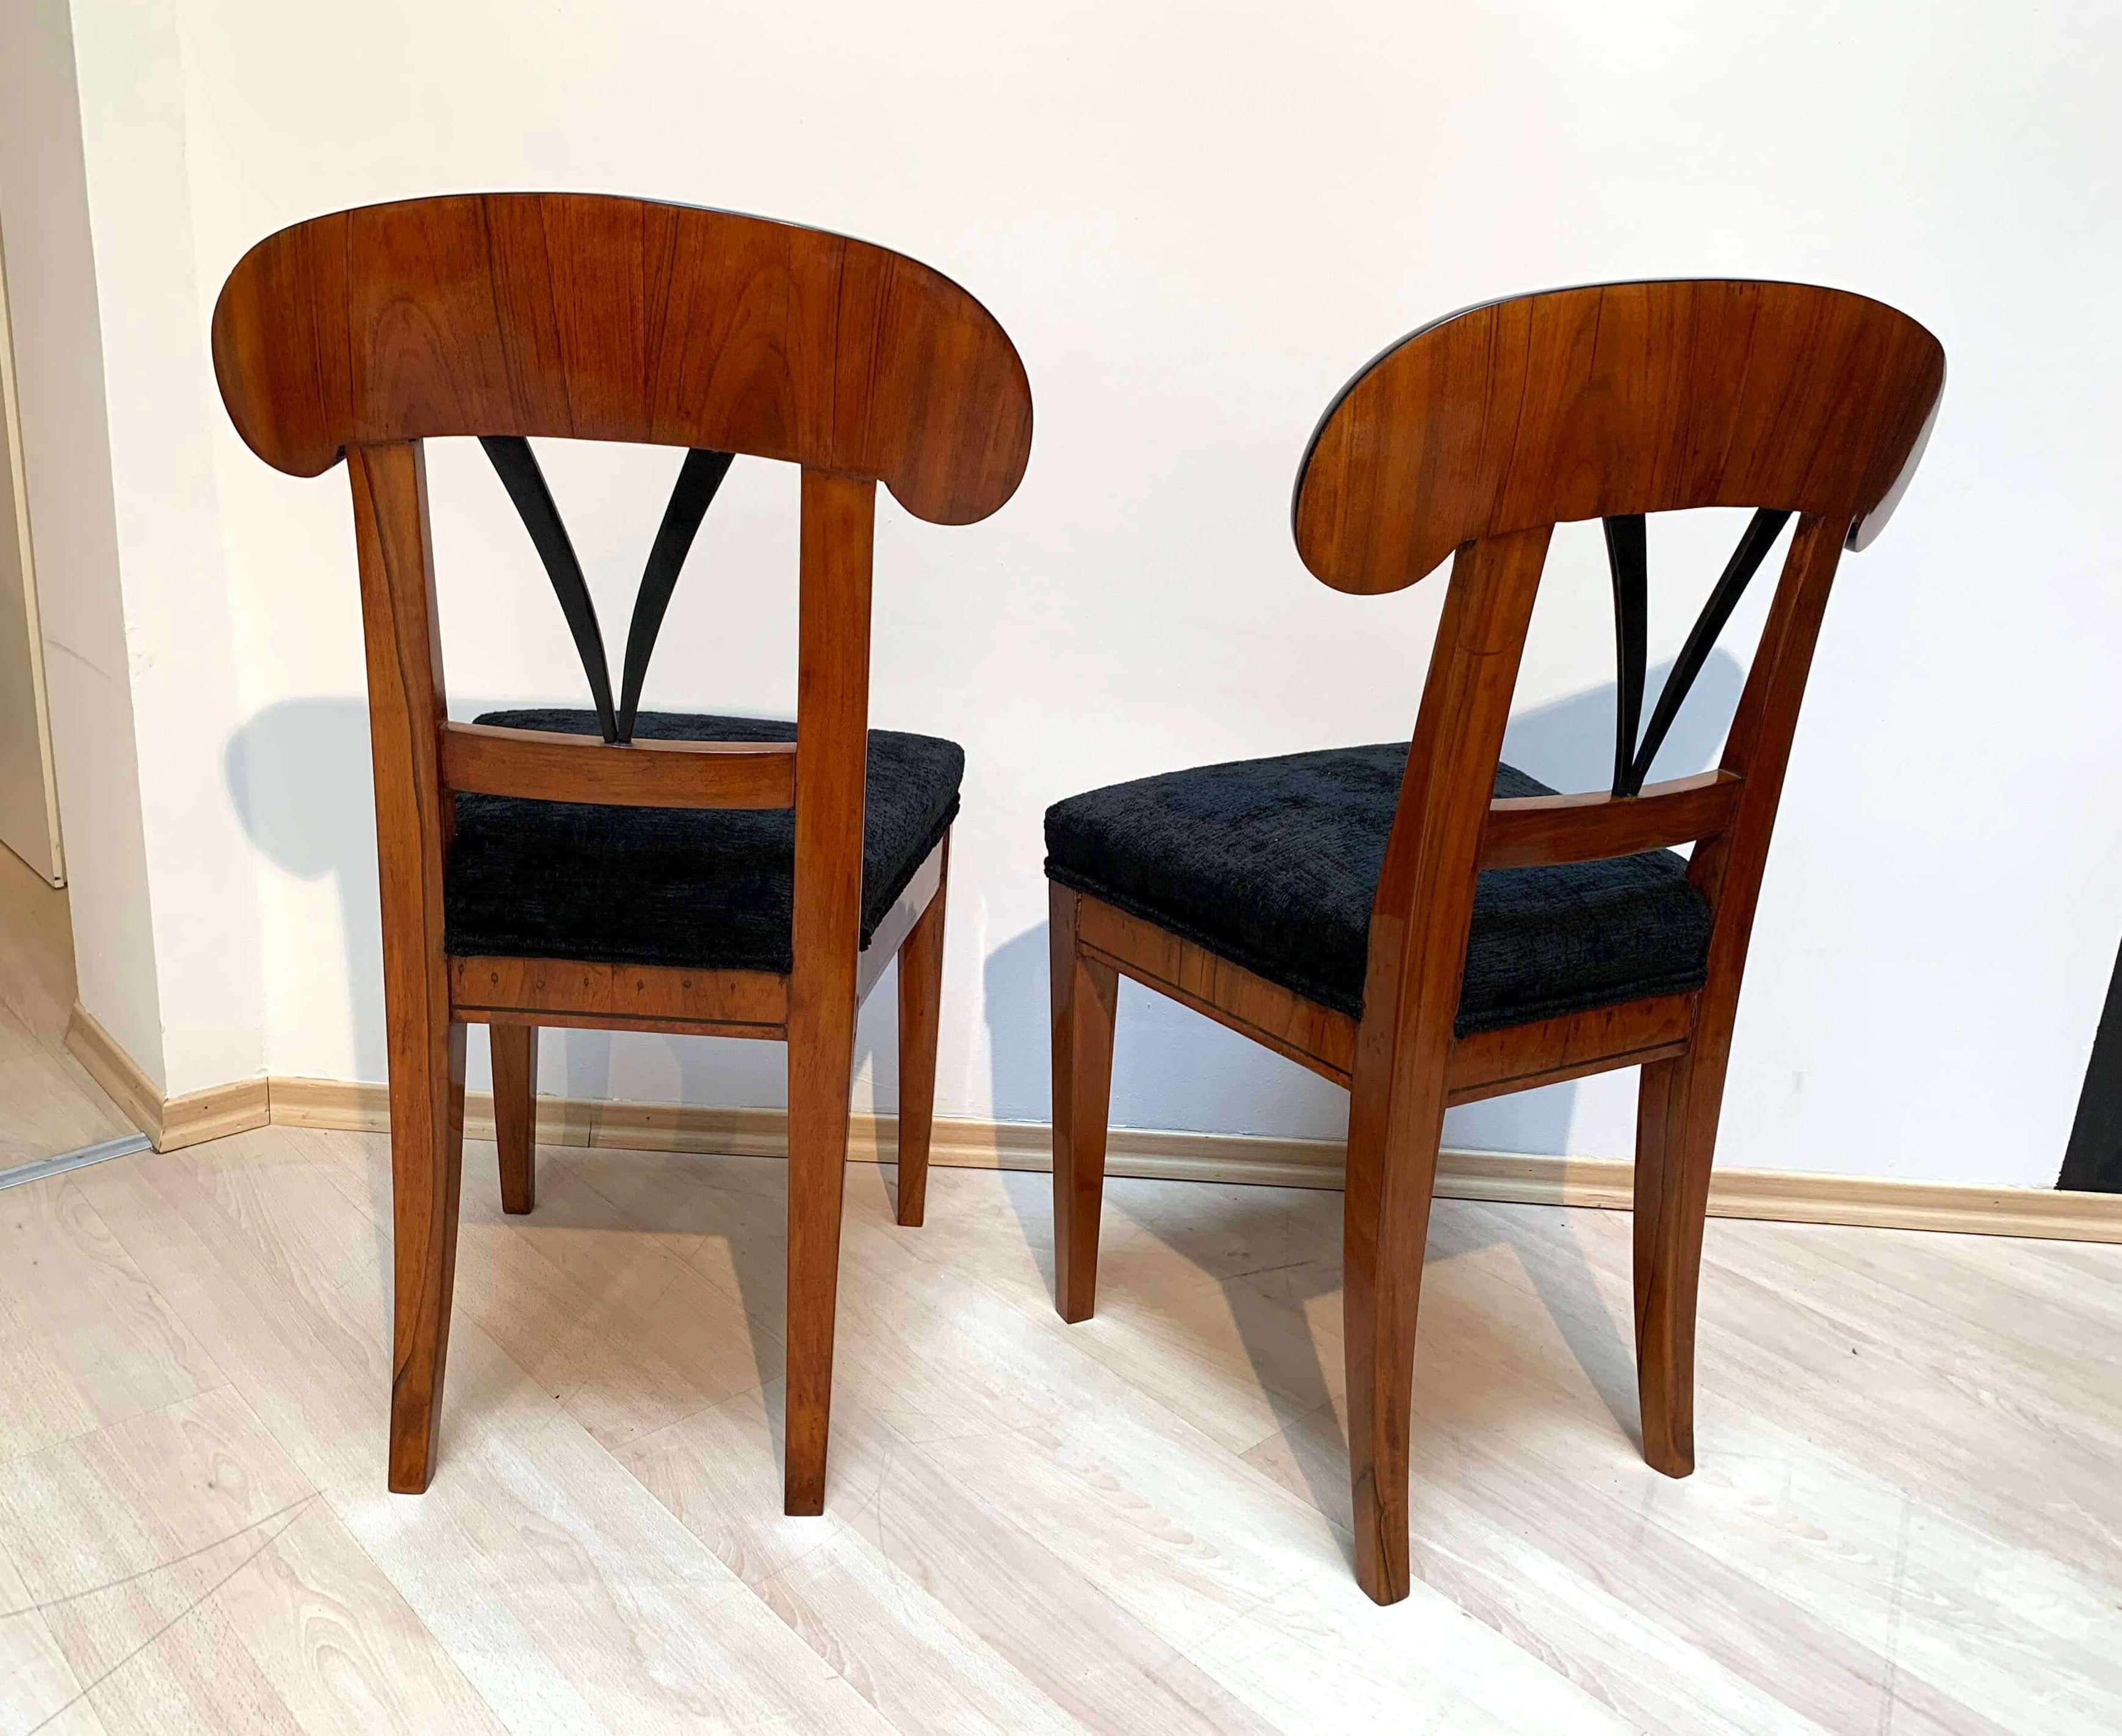 Pair of Biedermeier Shovel Chairs with Ink Painting, Walnut, South German, 1830s For Sale 2